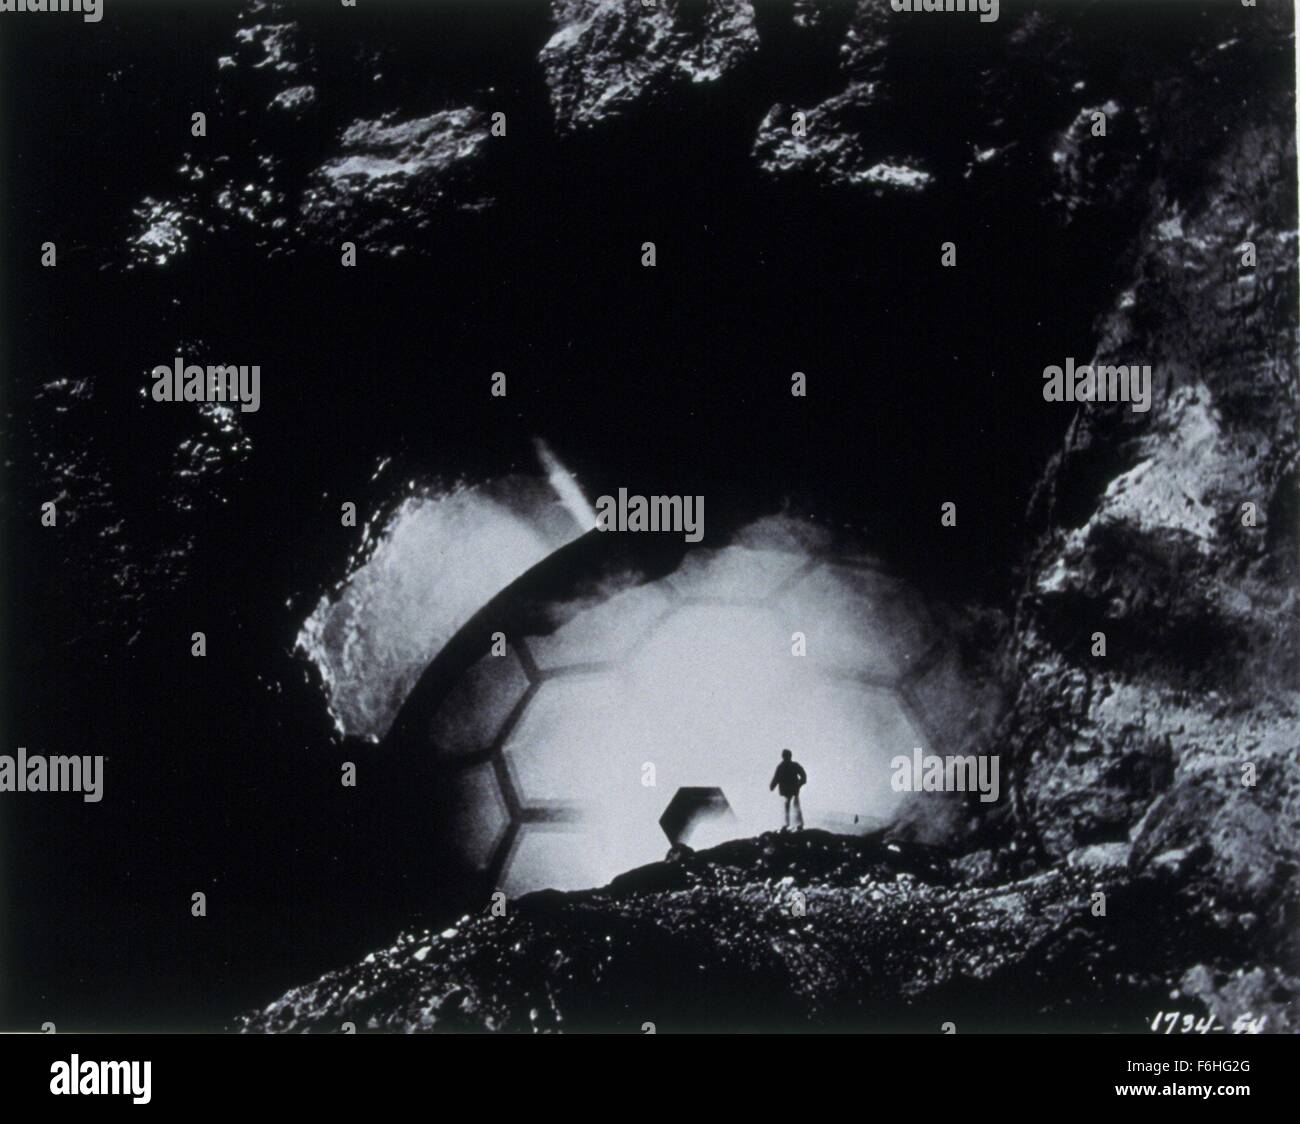 1953, Film Title: IT CAME FROM OUTER SPACE, Director: ARNOLD, Studio: UNIVERSAL. (Credit Image: SNAP) Stock Photo